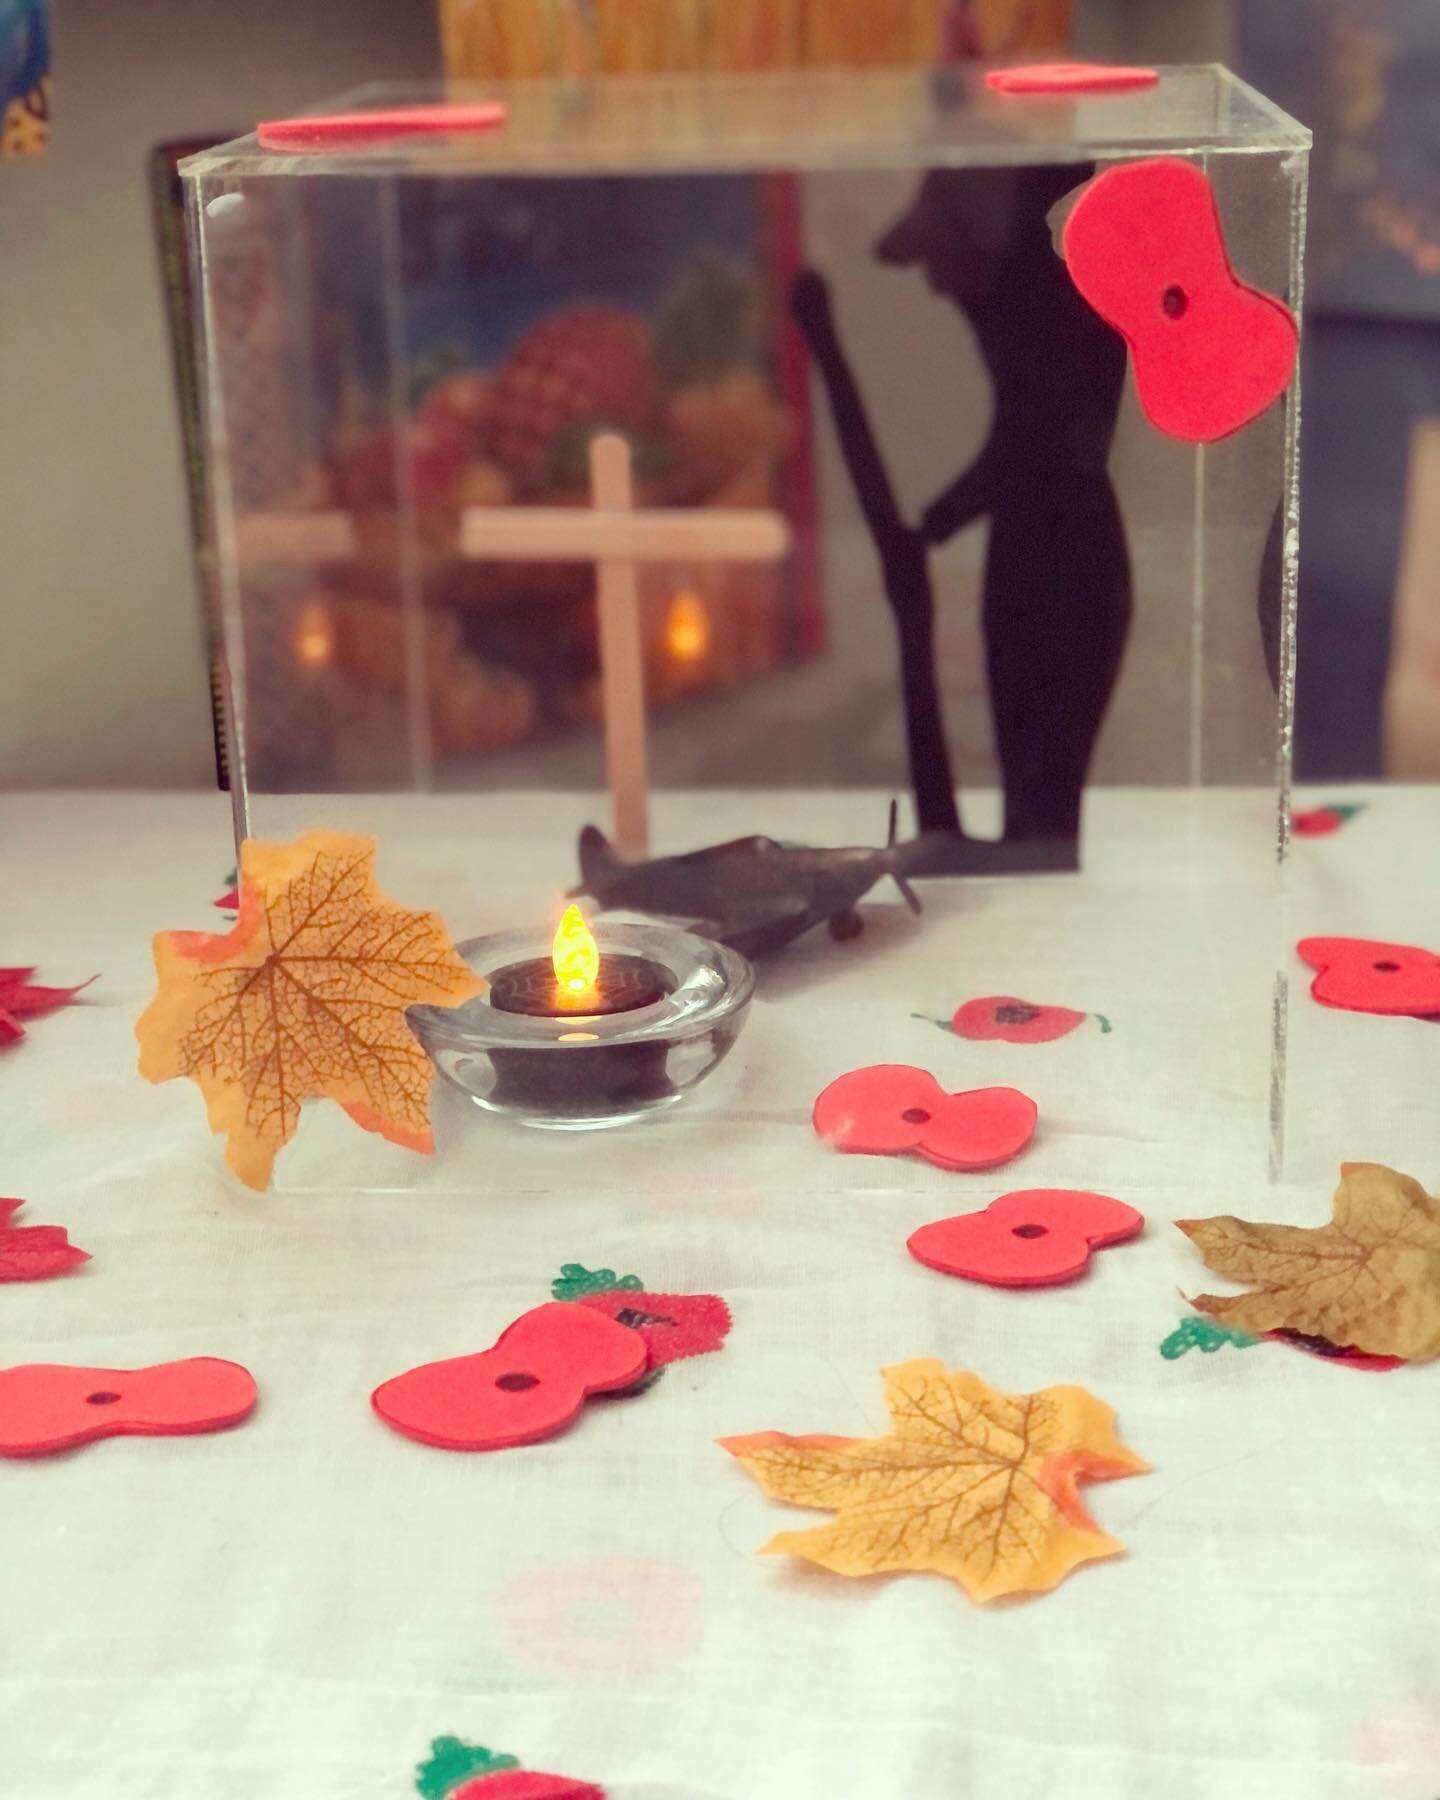 This week we will be highlighting Remembrance! Check out this lovely curiosity cube set up in Pine class 🌹